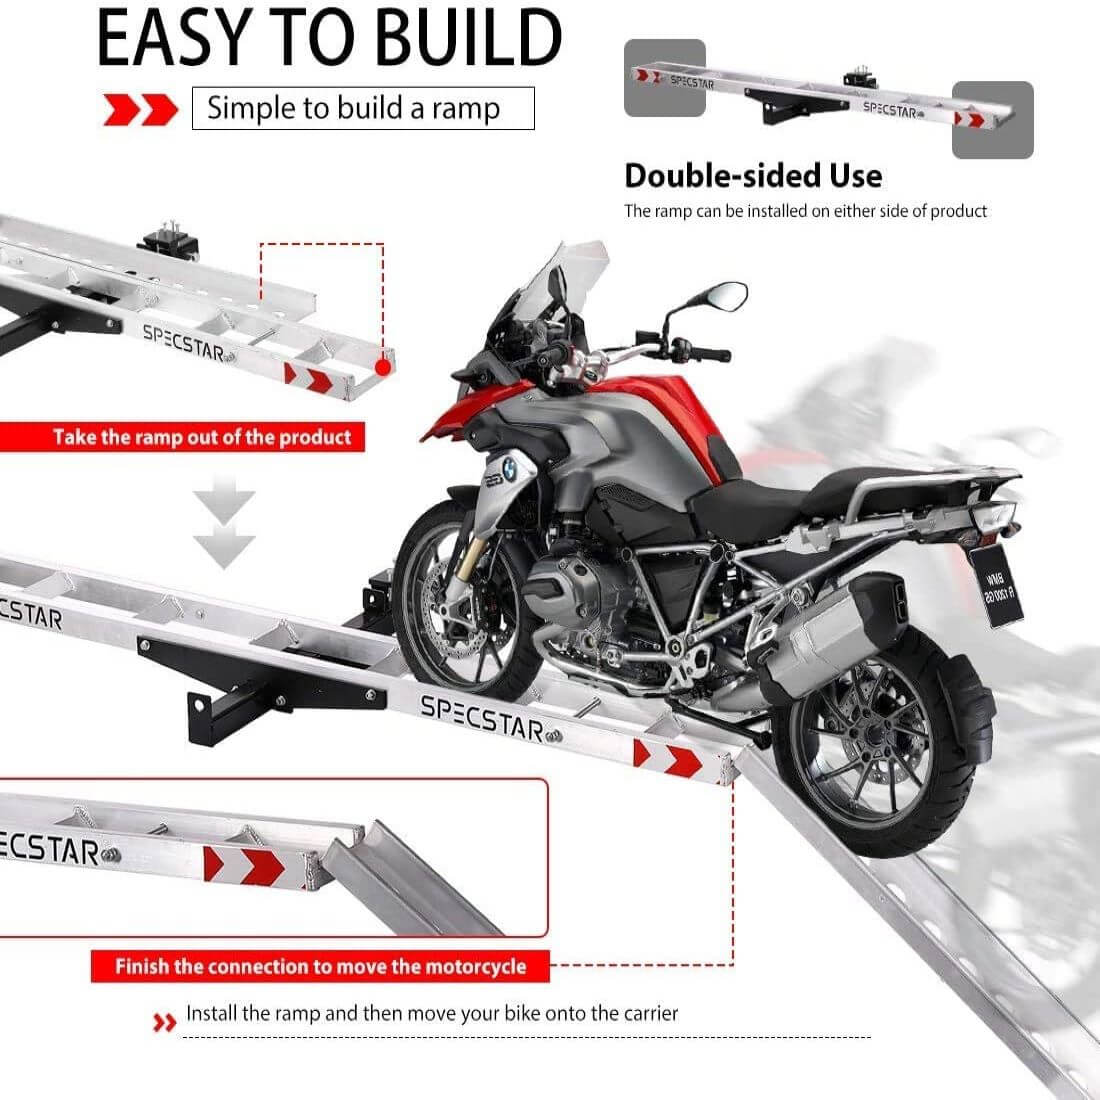 SPECSTAR Heavy Duty 450 Lbs Capacity Aluminum Motorcycle Carrier Anti Tilt Hitch Mounted Scooter Dirt Bike Rack with Loading Ramp and Locking Device